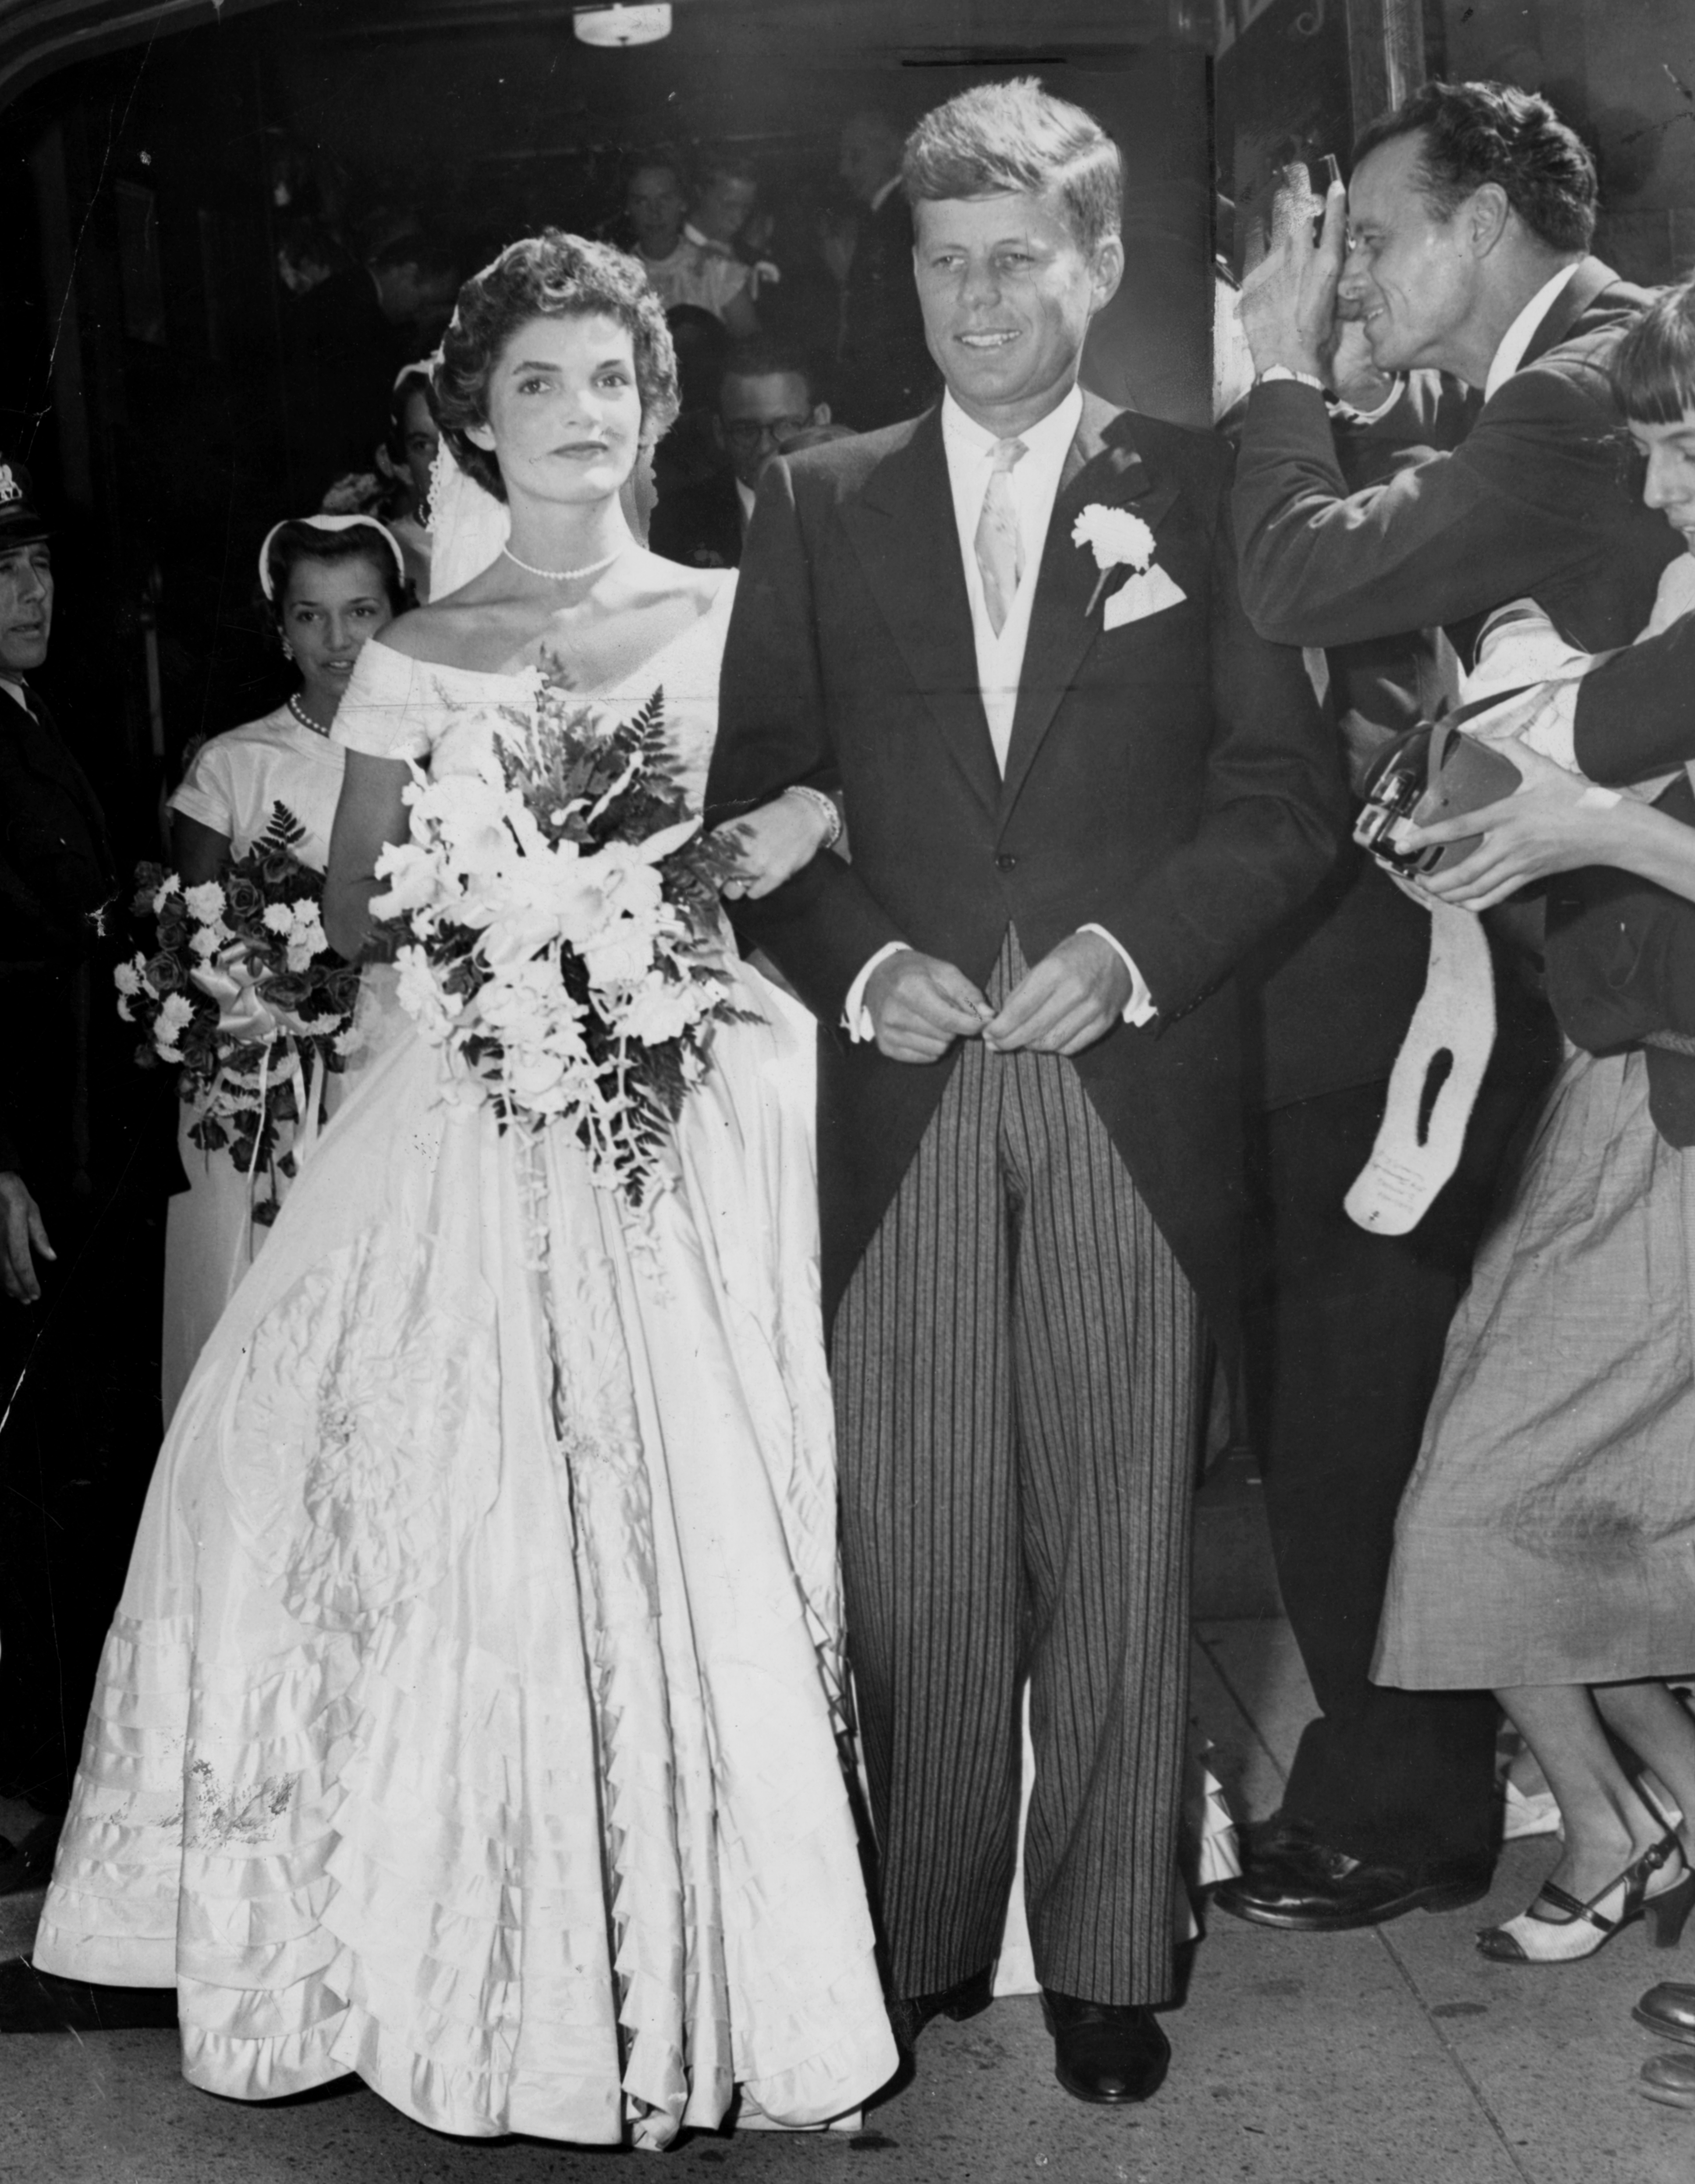 John F. Kennedy and Jacqueline Kennedy outside St. Mary's Church in Newport, R.I., after their wedding on Sept. 12, 1953 (Charles F. McCormick—Boston Globe/Getty Images)